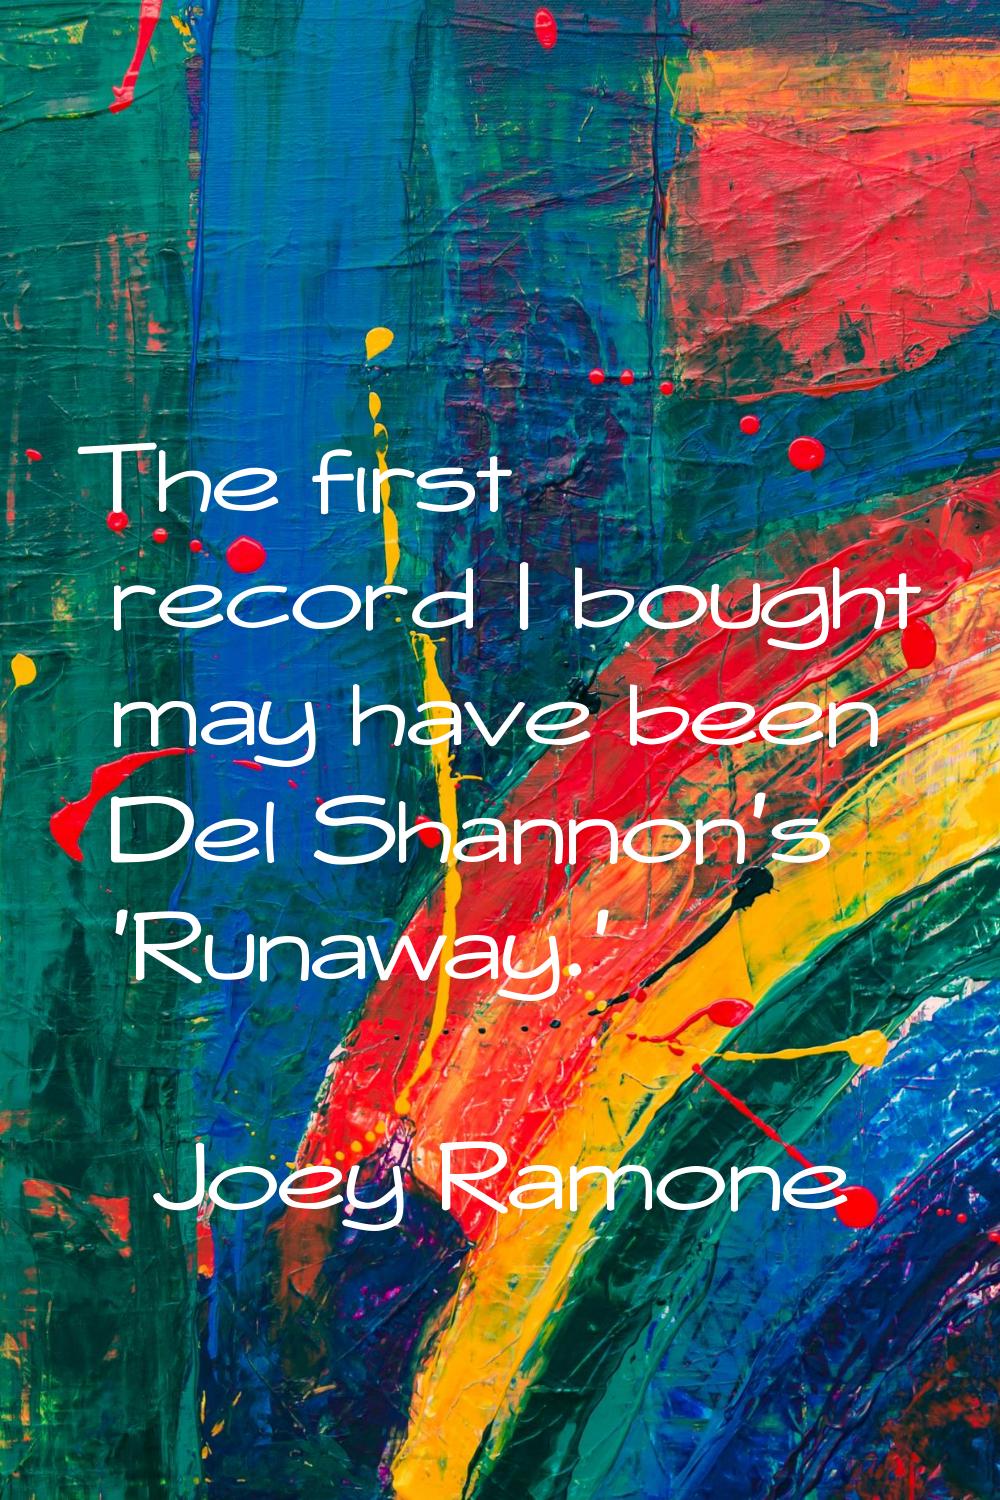 The first record I bought may have been Del Shannon's 'Runaway.'